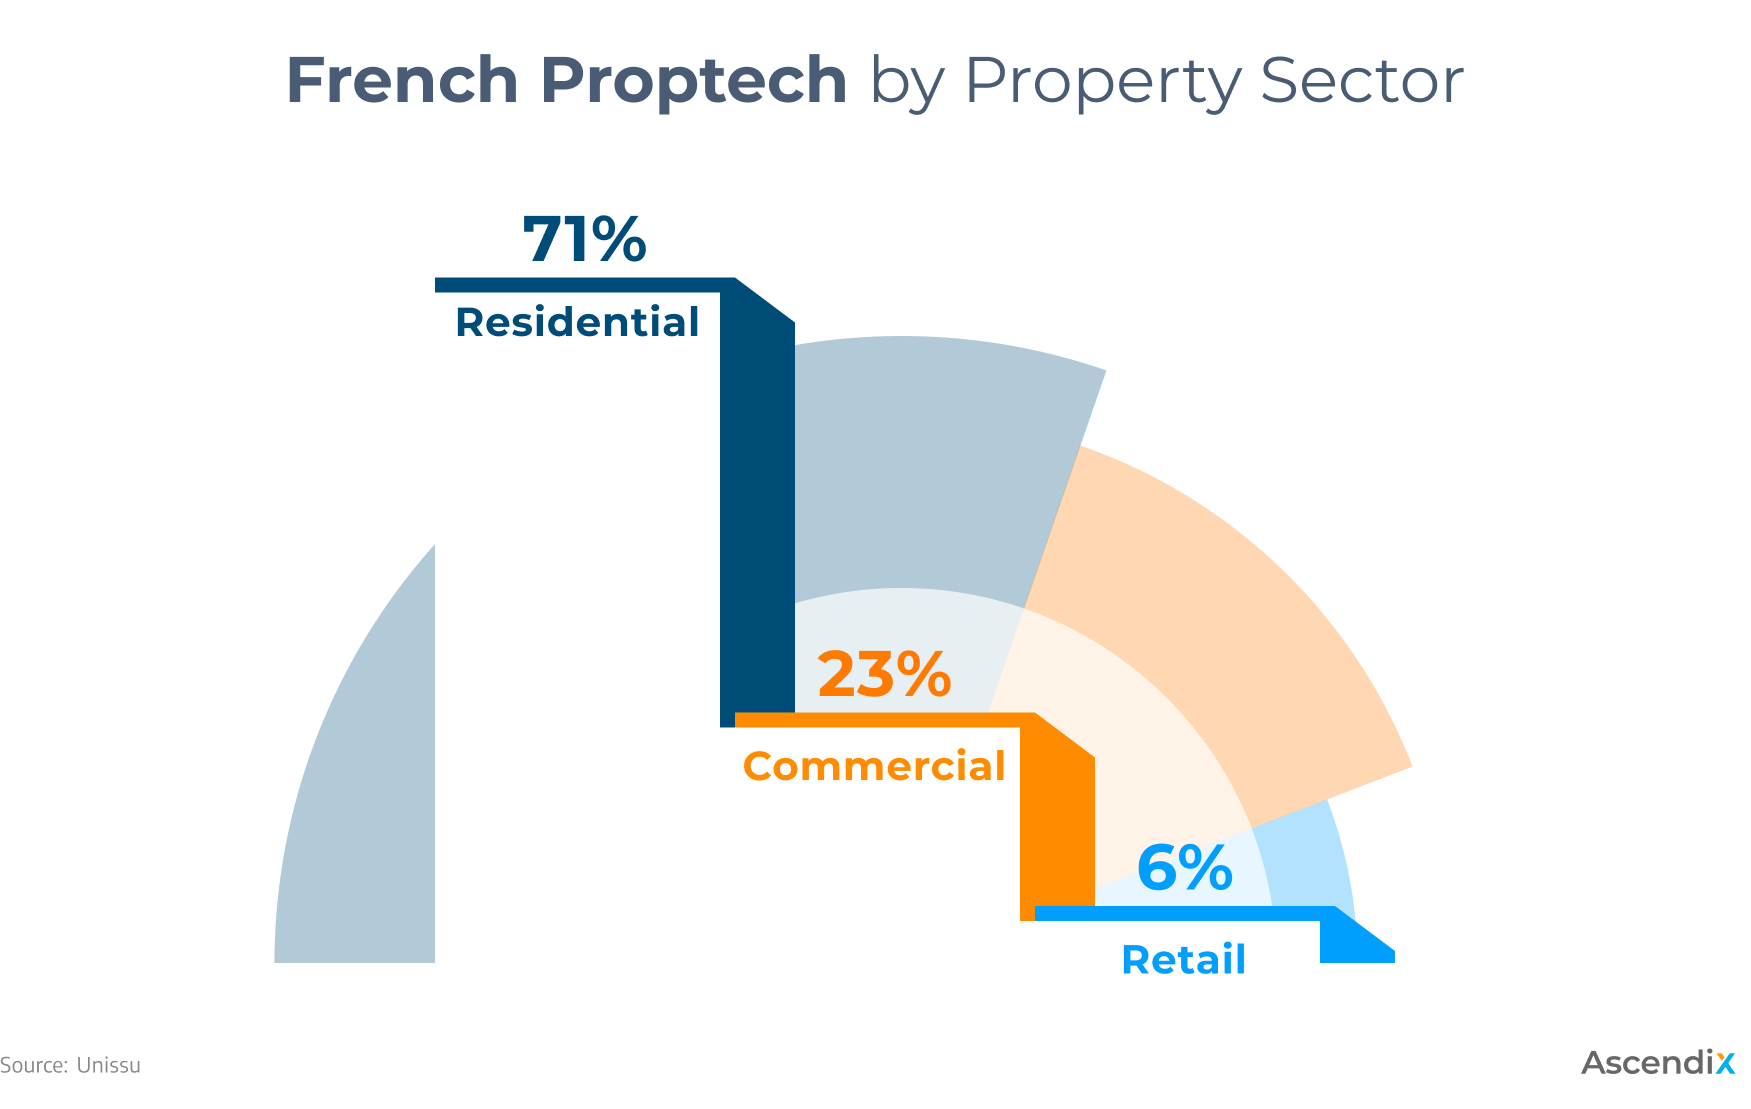 French Proptech Software Market by Property Sector